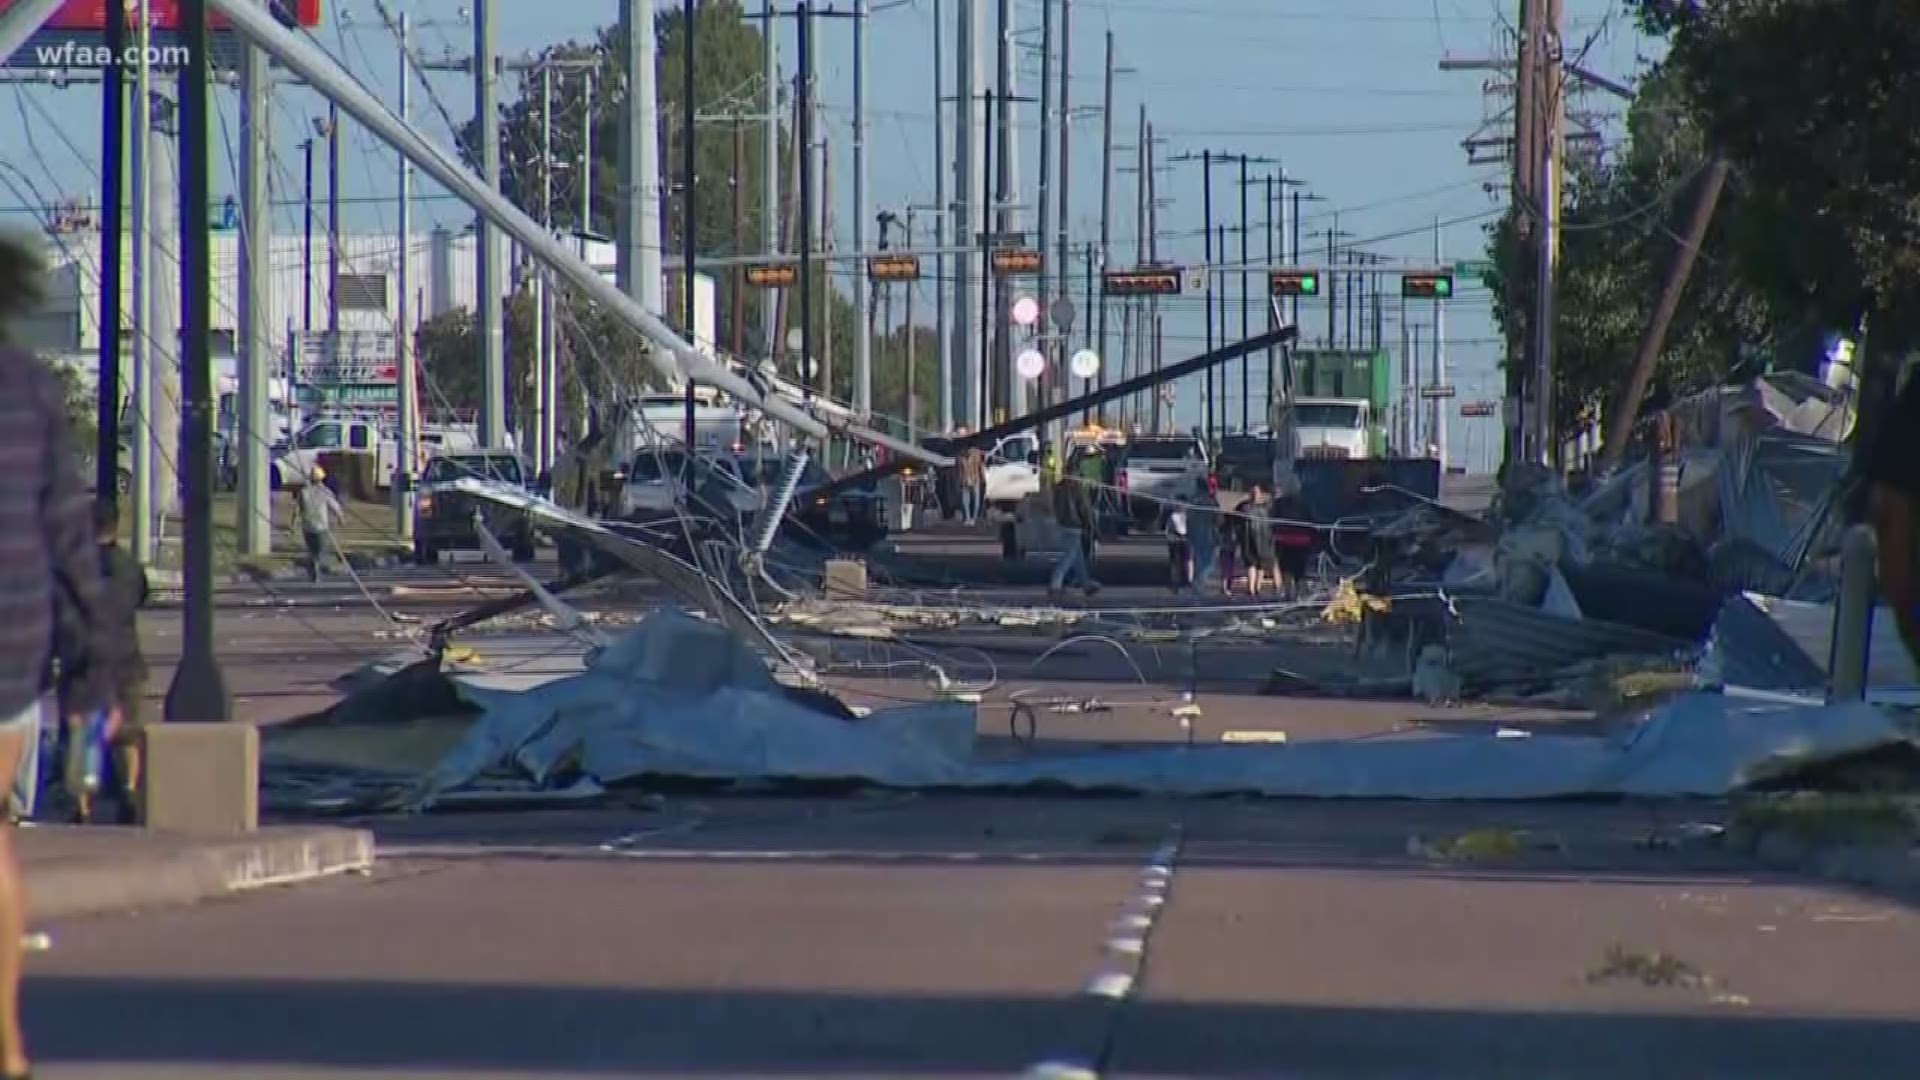 Sunday night's DFW storms brought down power lines in Garland and destroyed an office building that had just recently been completed in the last few months.